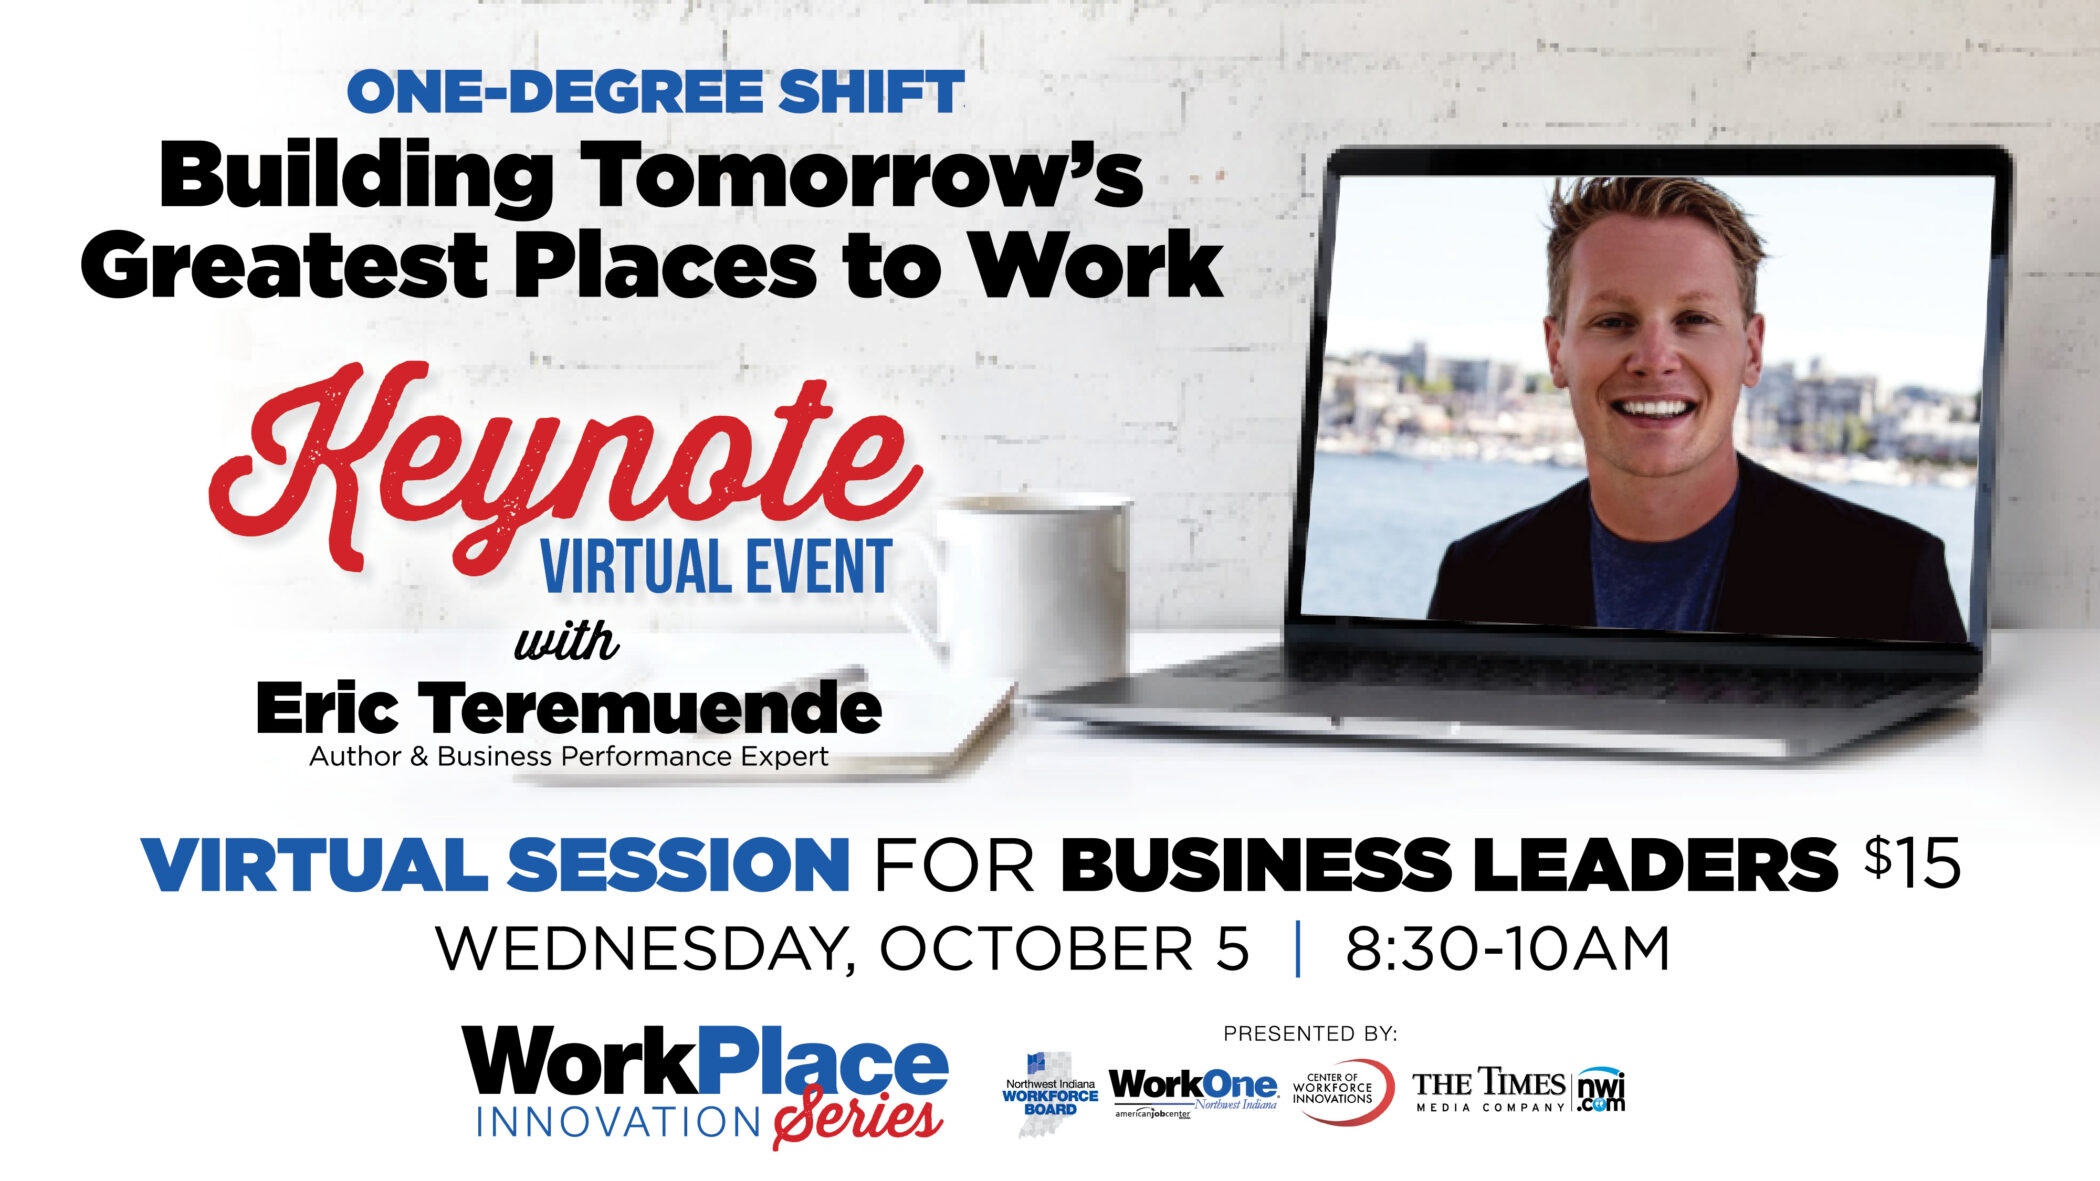 Promotional graphic for Workplace Innovation Series event featuring Eric Teremuende